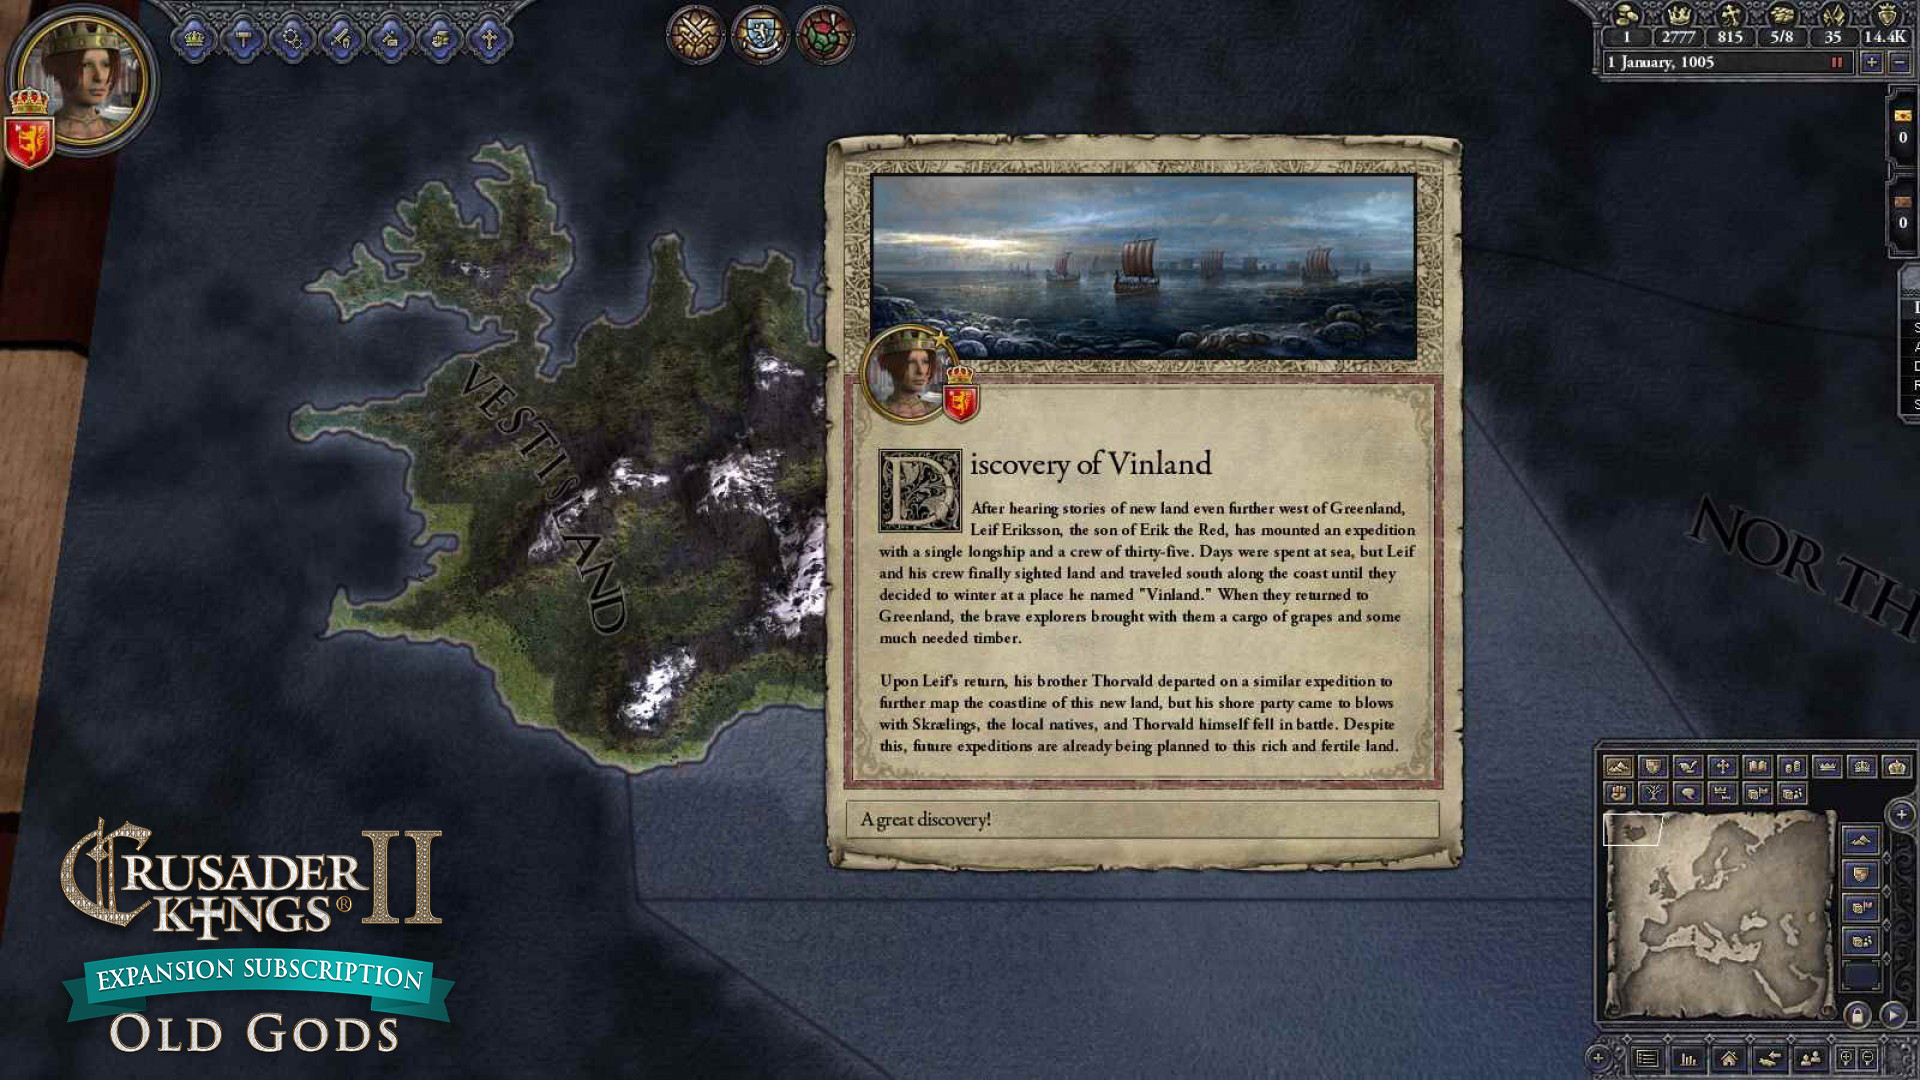 Crusader Kings II - Expansion Subscription Featured Screenshot #1